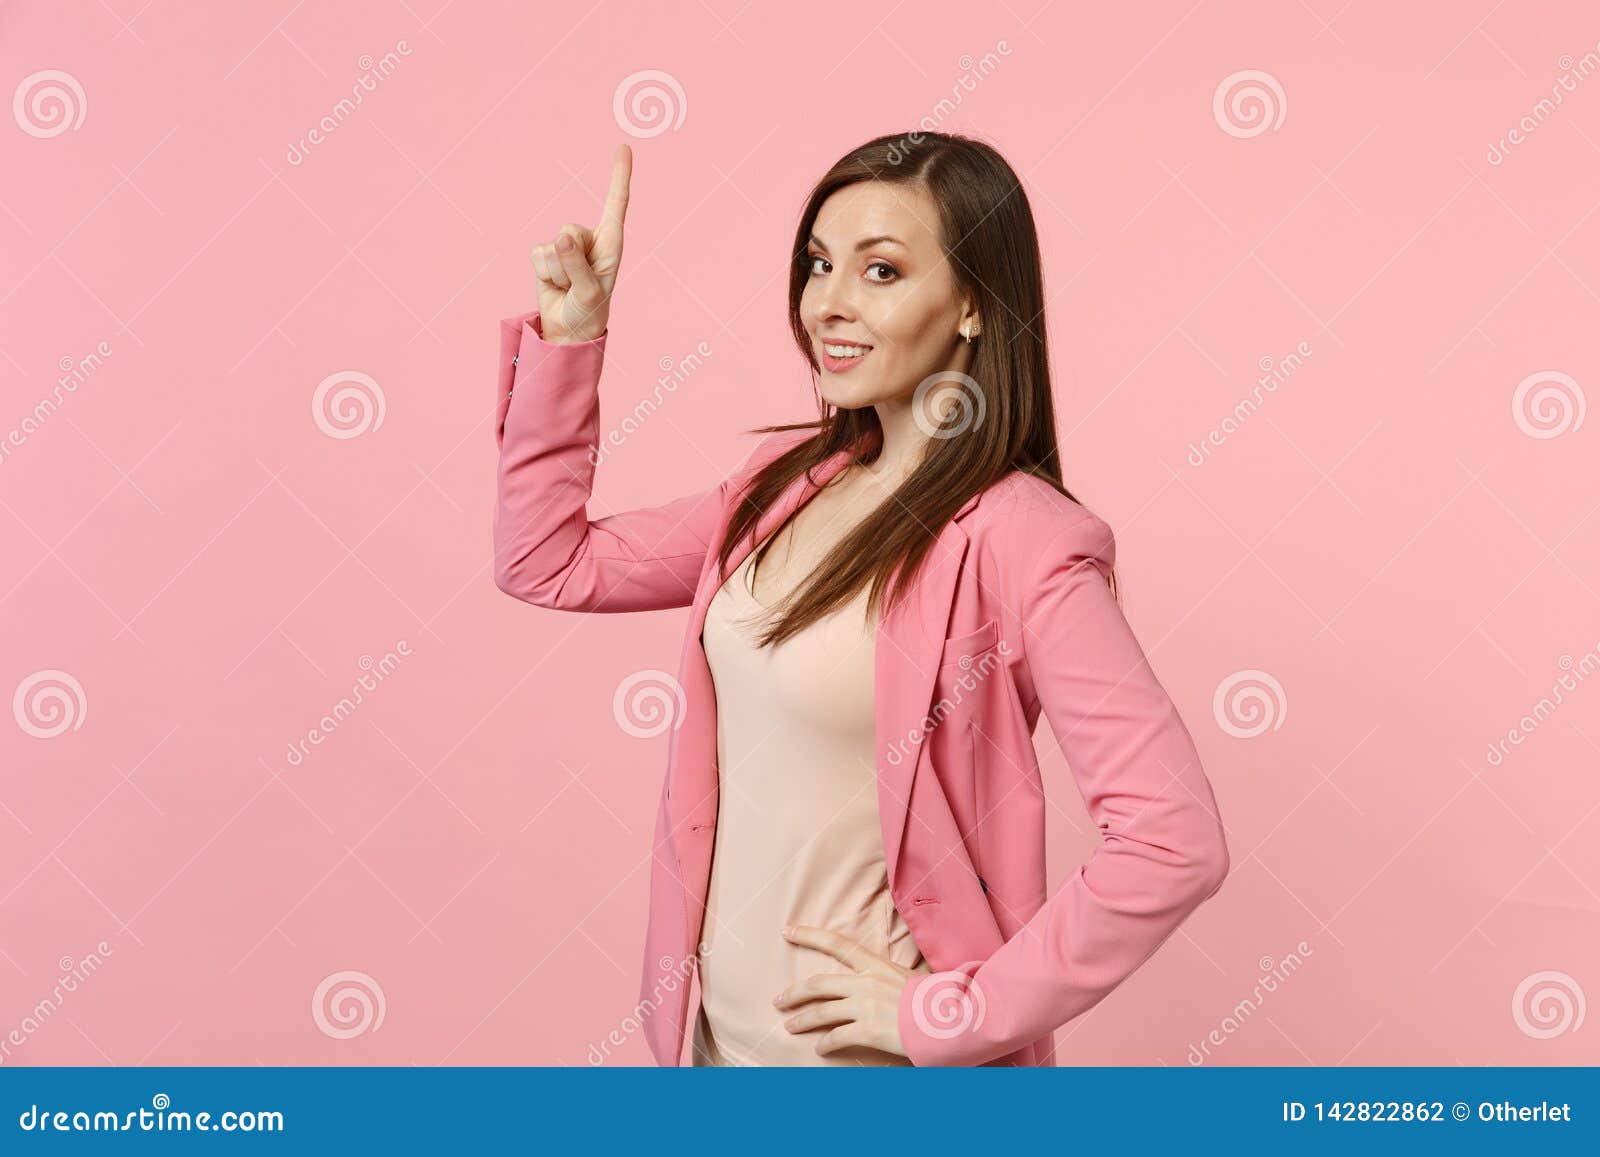 Portrait Of Smiling Beautiful Woman Wearing Jacket Standing Pointing Index Finger Up Isolated 